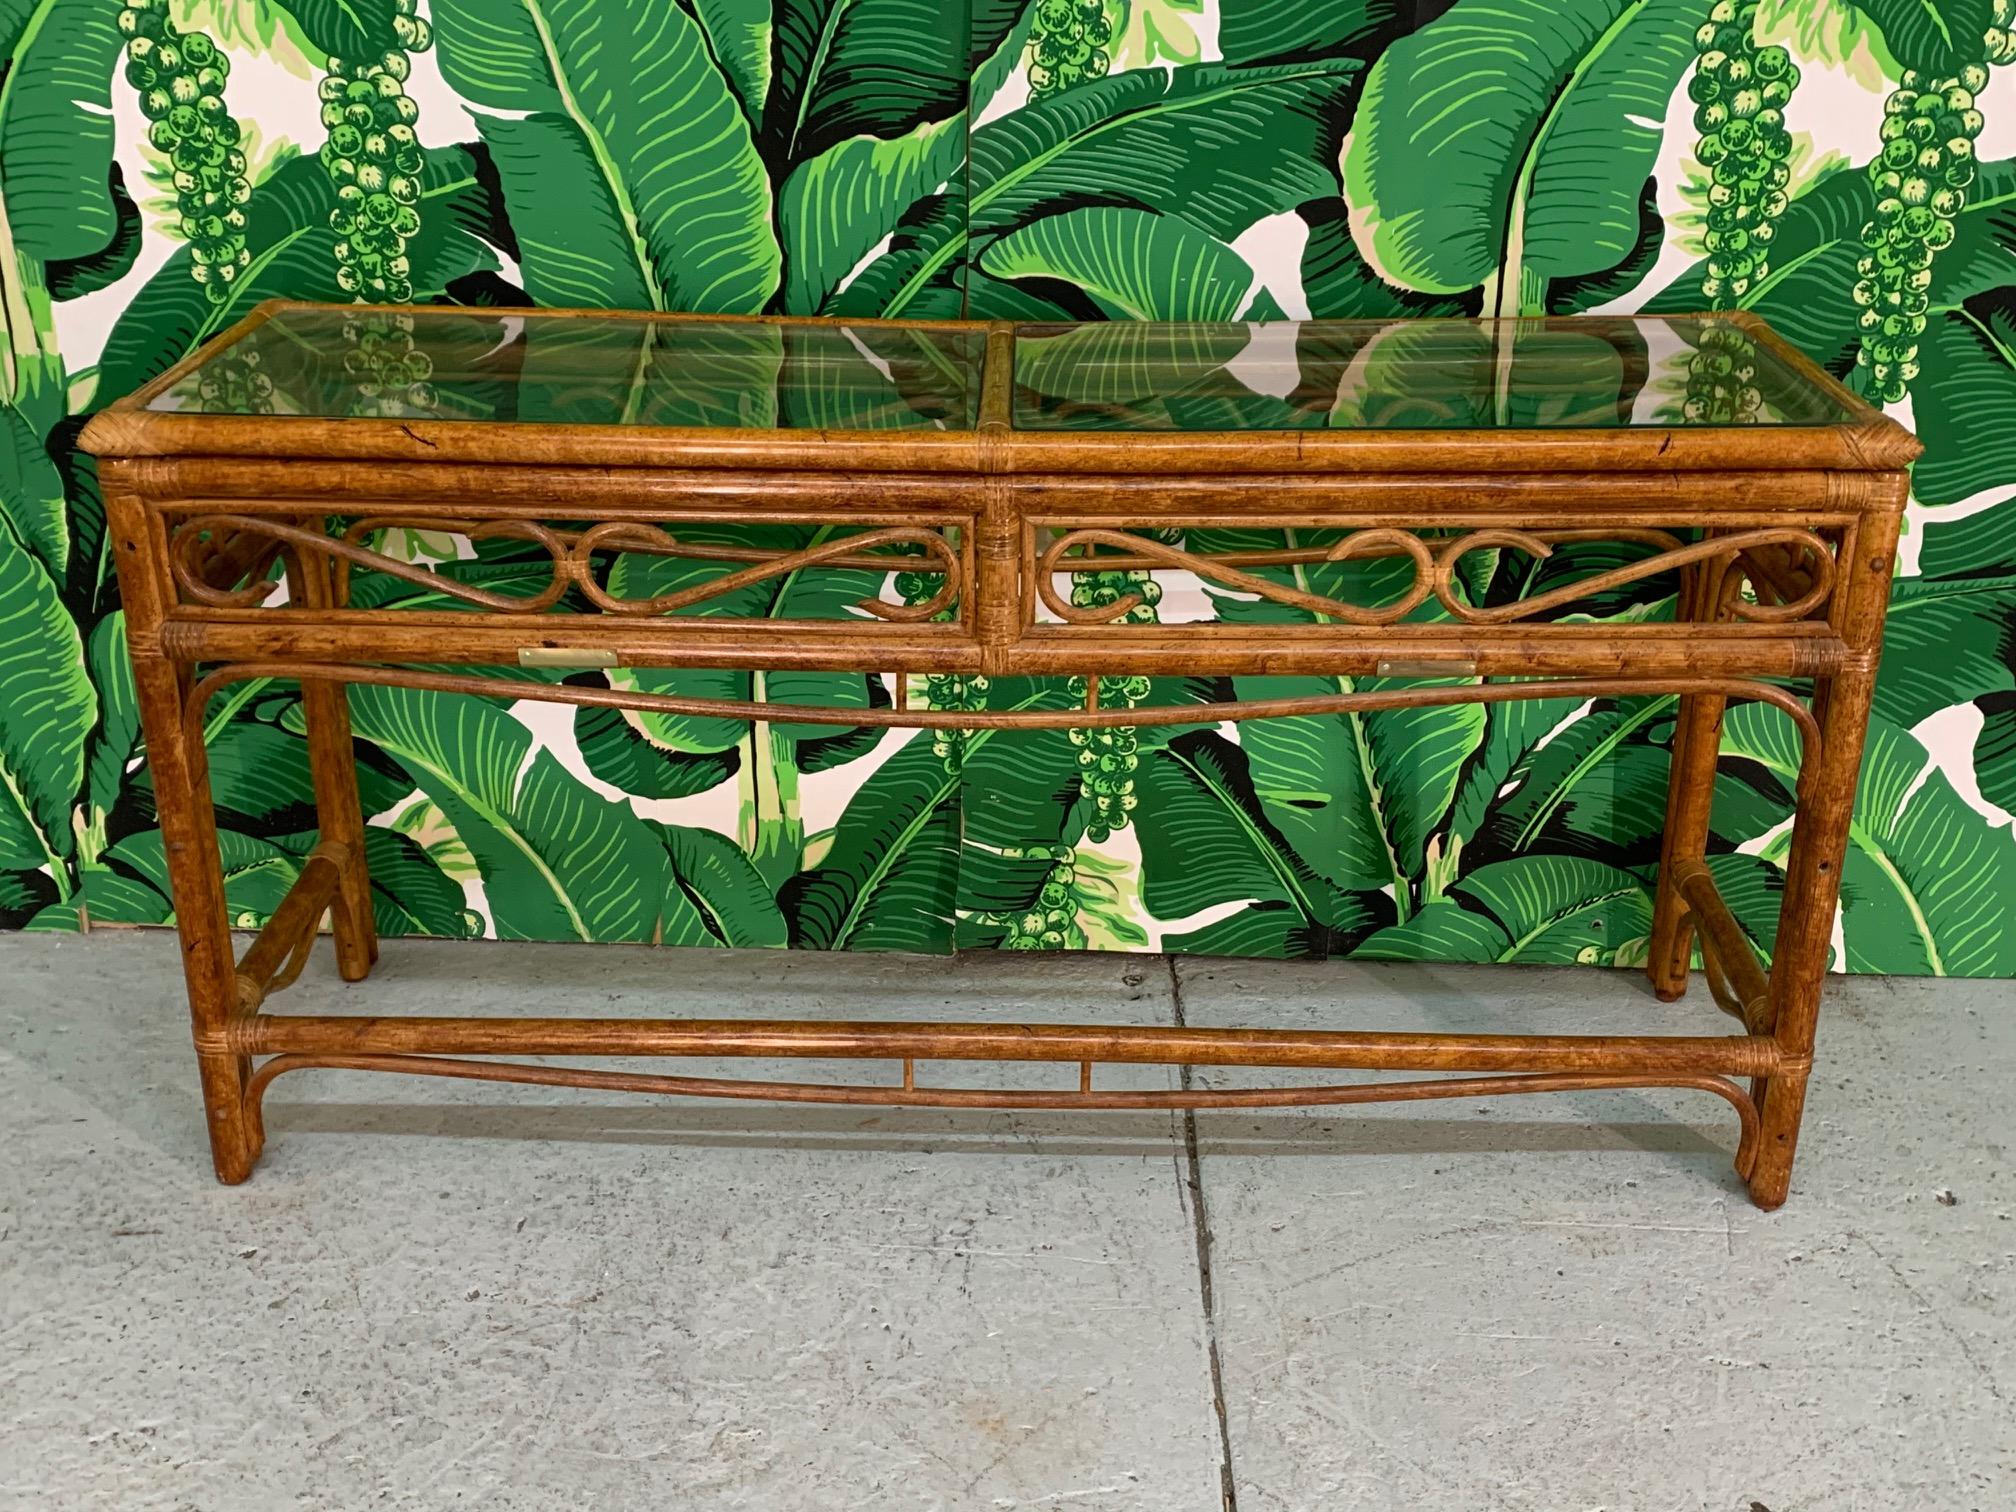 Rattan console table features brass detailing and glass top. Perfect touch of tropical decor to any room. Good condition with minor imperfections consistent with age.